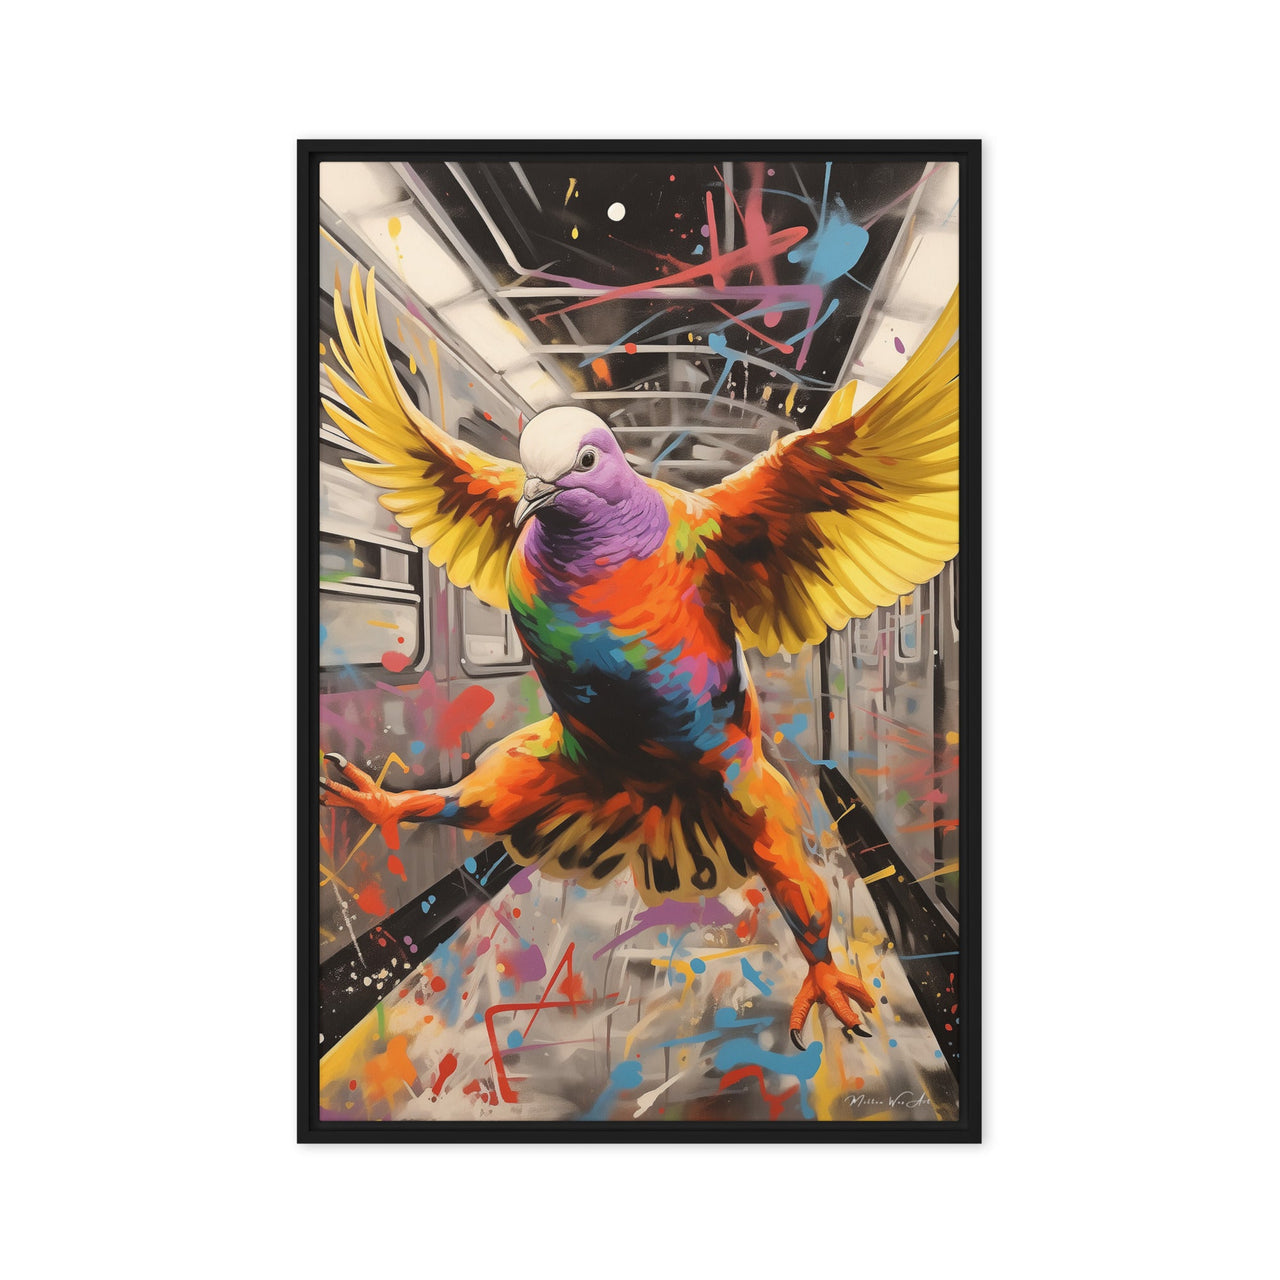 Colorful Parrot in Flight Against Graffiti-Decorated Subway, Urban Art Canvas Print